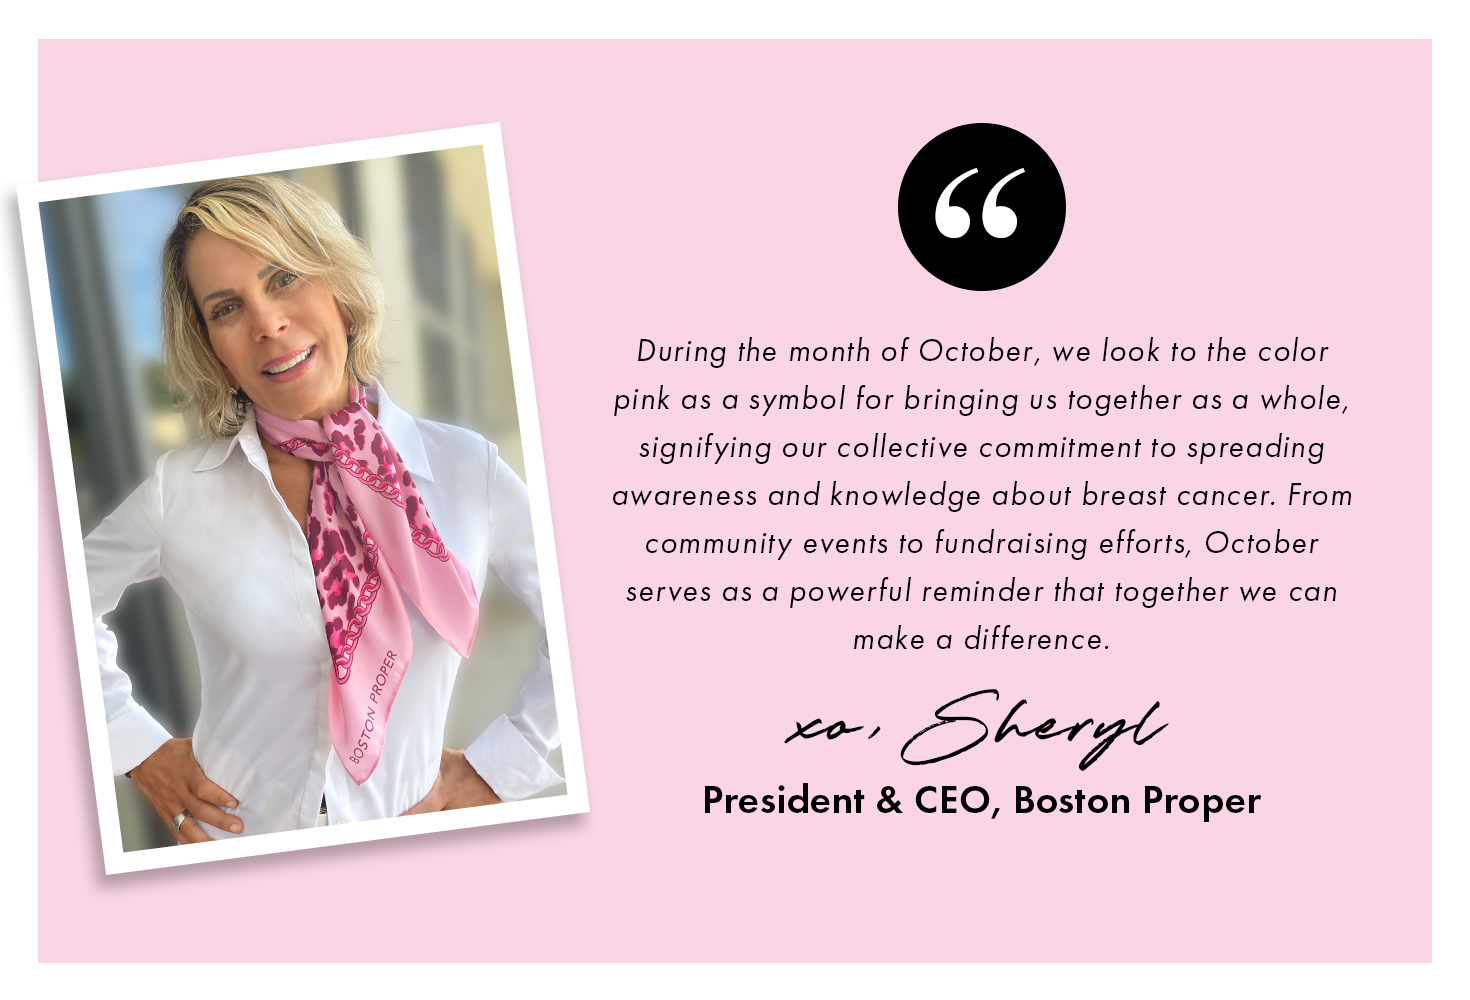 Pink background with a photo of our CEO. "During the month of October, we look to the color pink as a symbol for brining us together as a whole,signyfying our collective commintment to spreading awarness and knowledge about breast cancer. From community events to fundraising efforts, October serves as a powerful reminder that together we can make a difference."